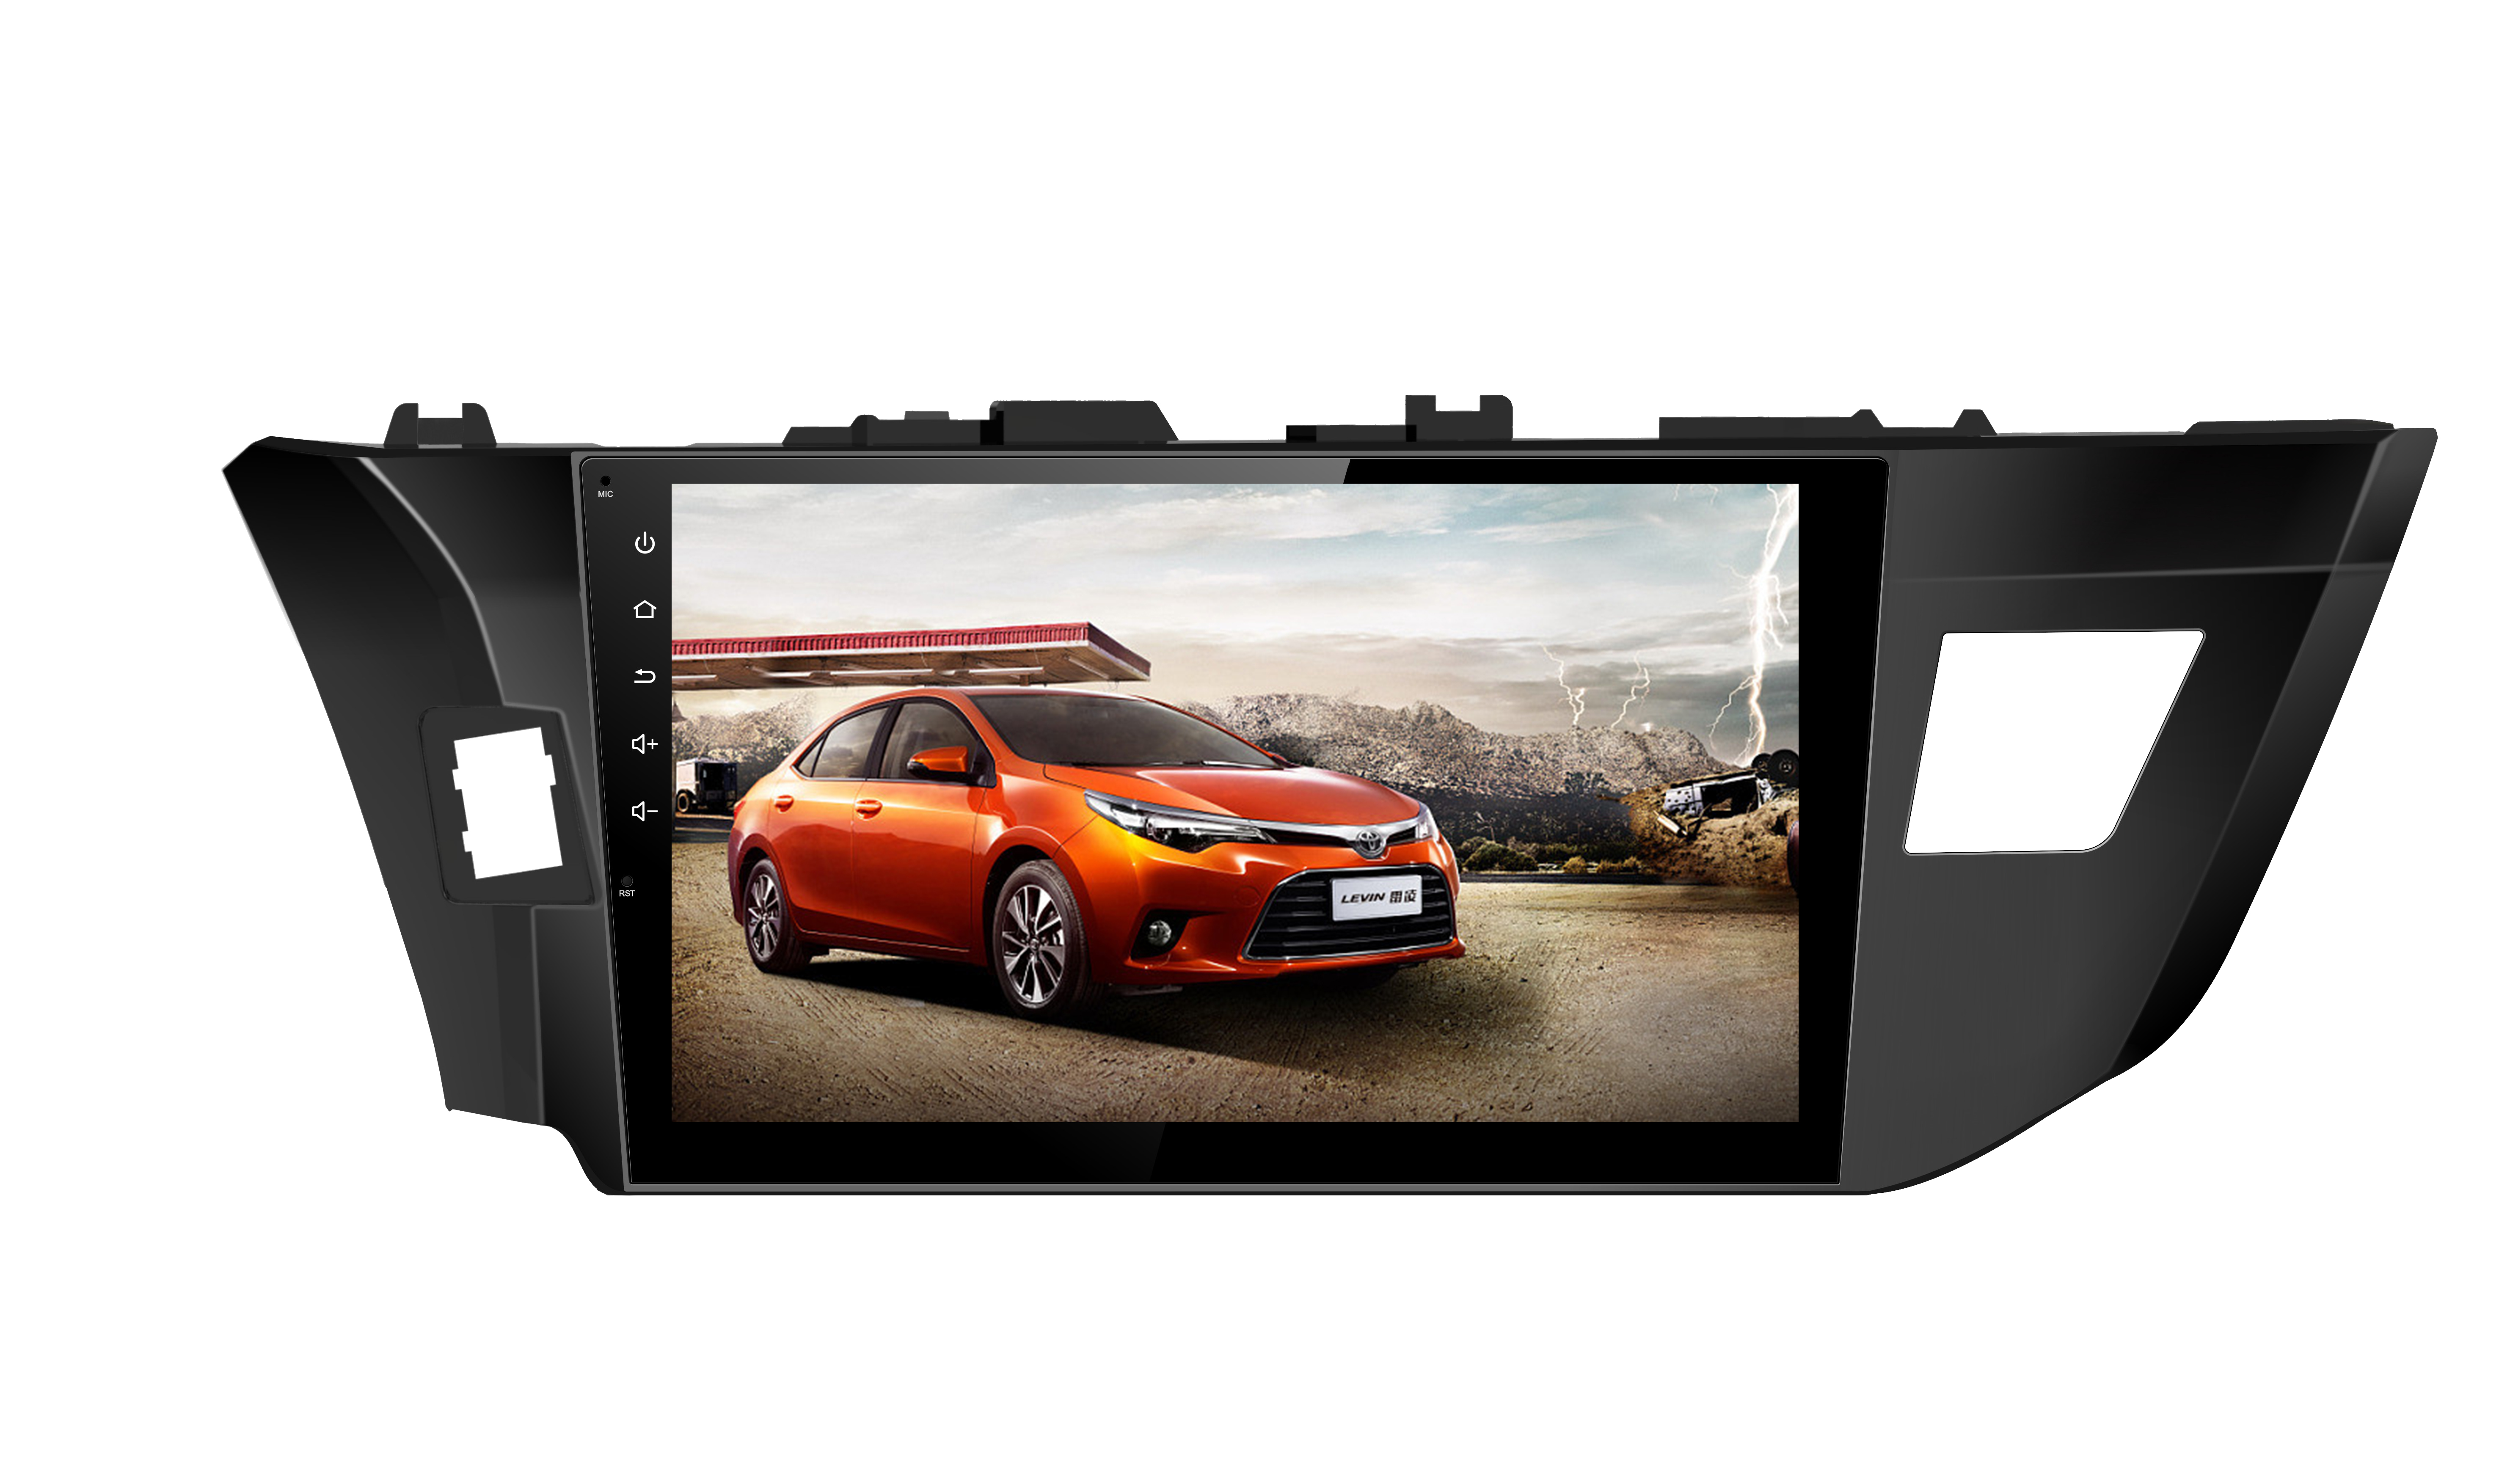 TOYOTA Corolla/Levin 2013 10.1'' Capacitive Touch Screen Car Pad Android 6.0/7.1 FM AM Radio Auto GPS navi 2G 32G Bluetooth Wifi Mirror link Eight/Quad Cores